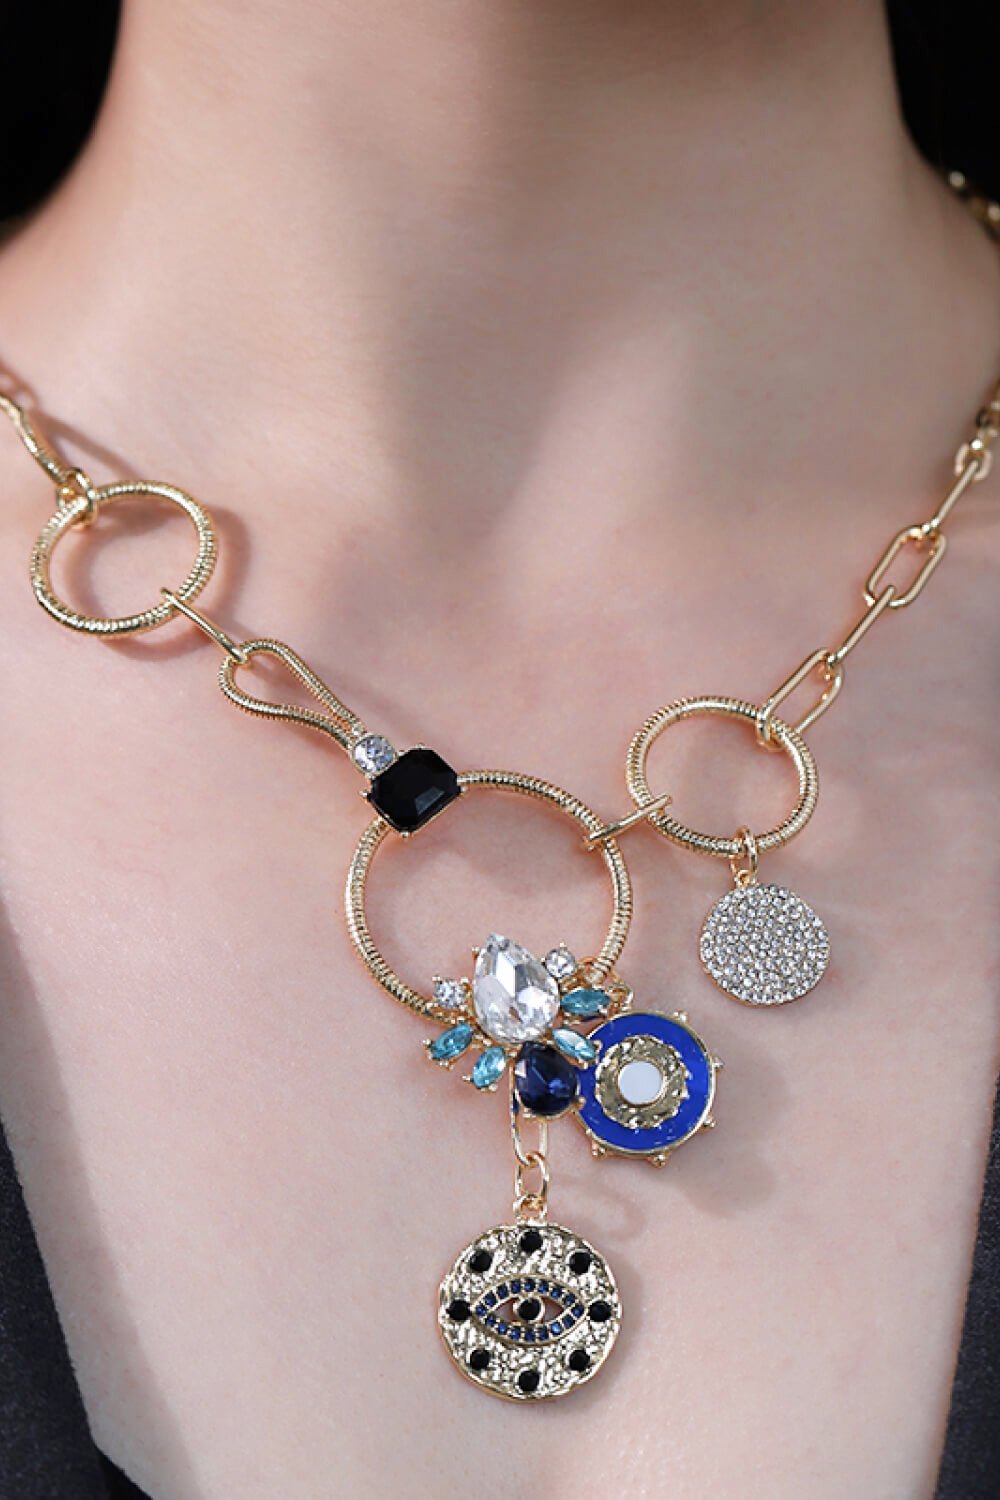 18K Gold-Plated Rhinestone Evil Eye Pendant Necklace - Kings Crown Jewel Boutique